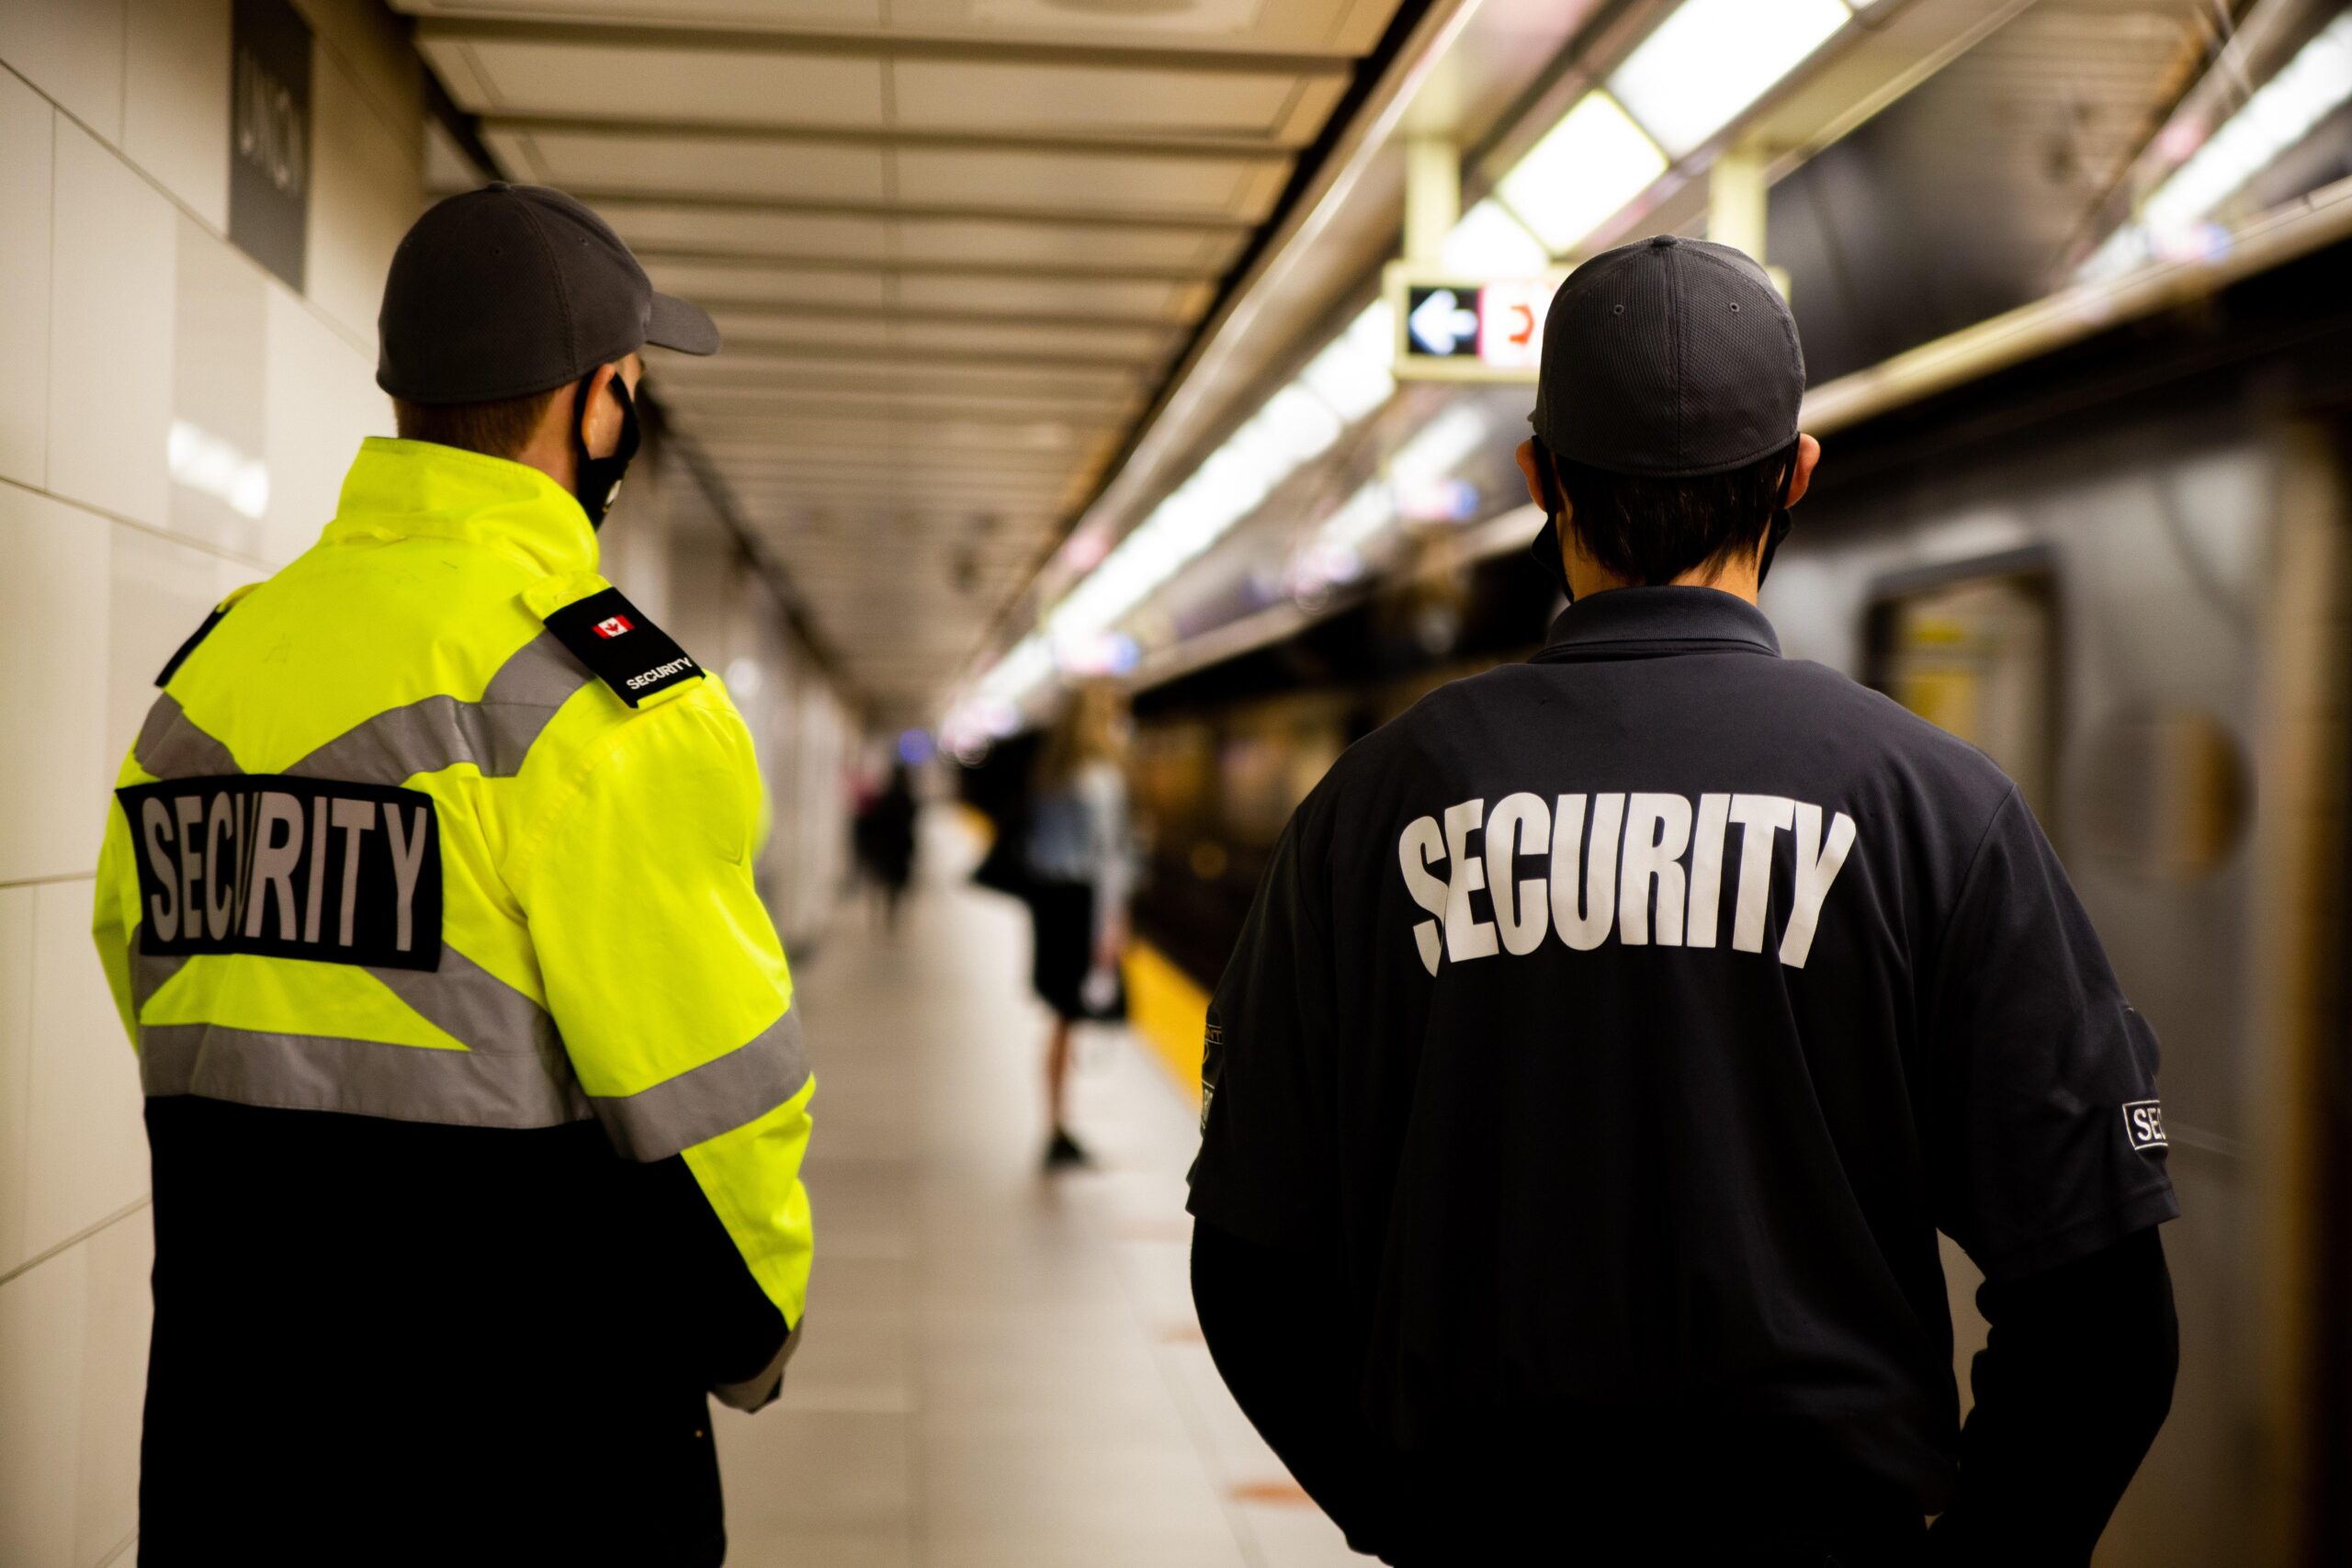 The Benefits Of Hiring A Professional Security Service For Your Business In London